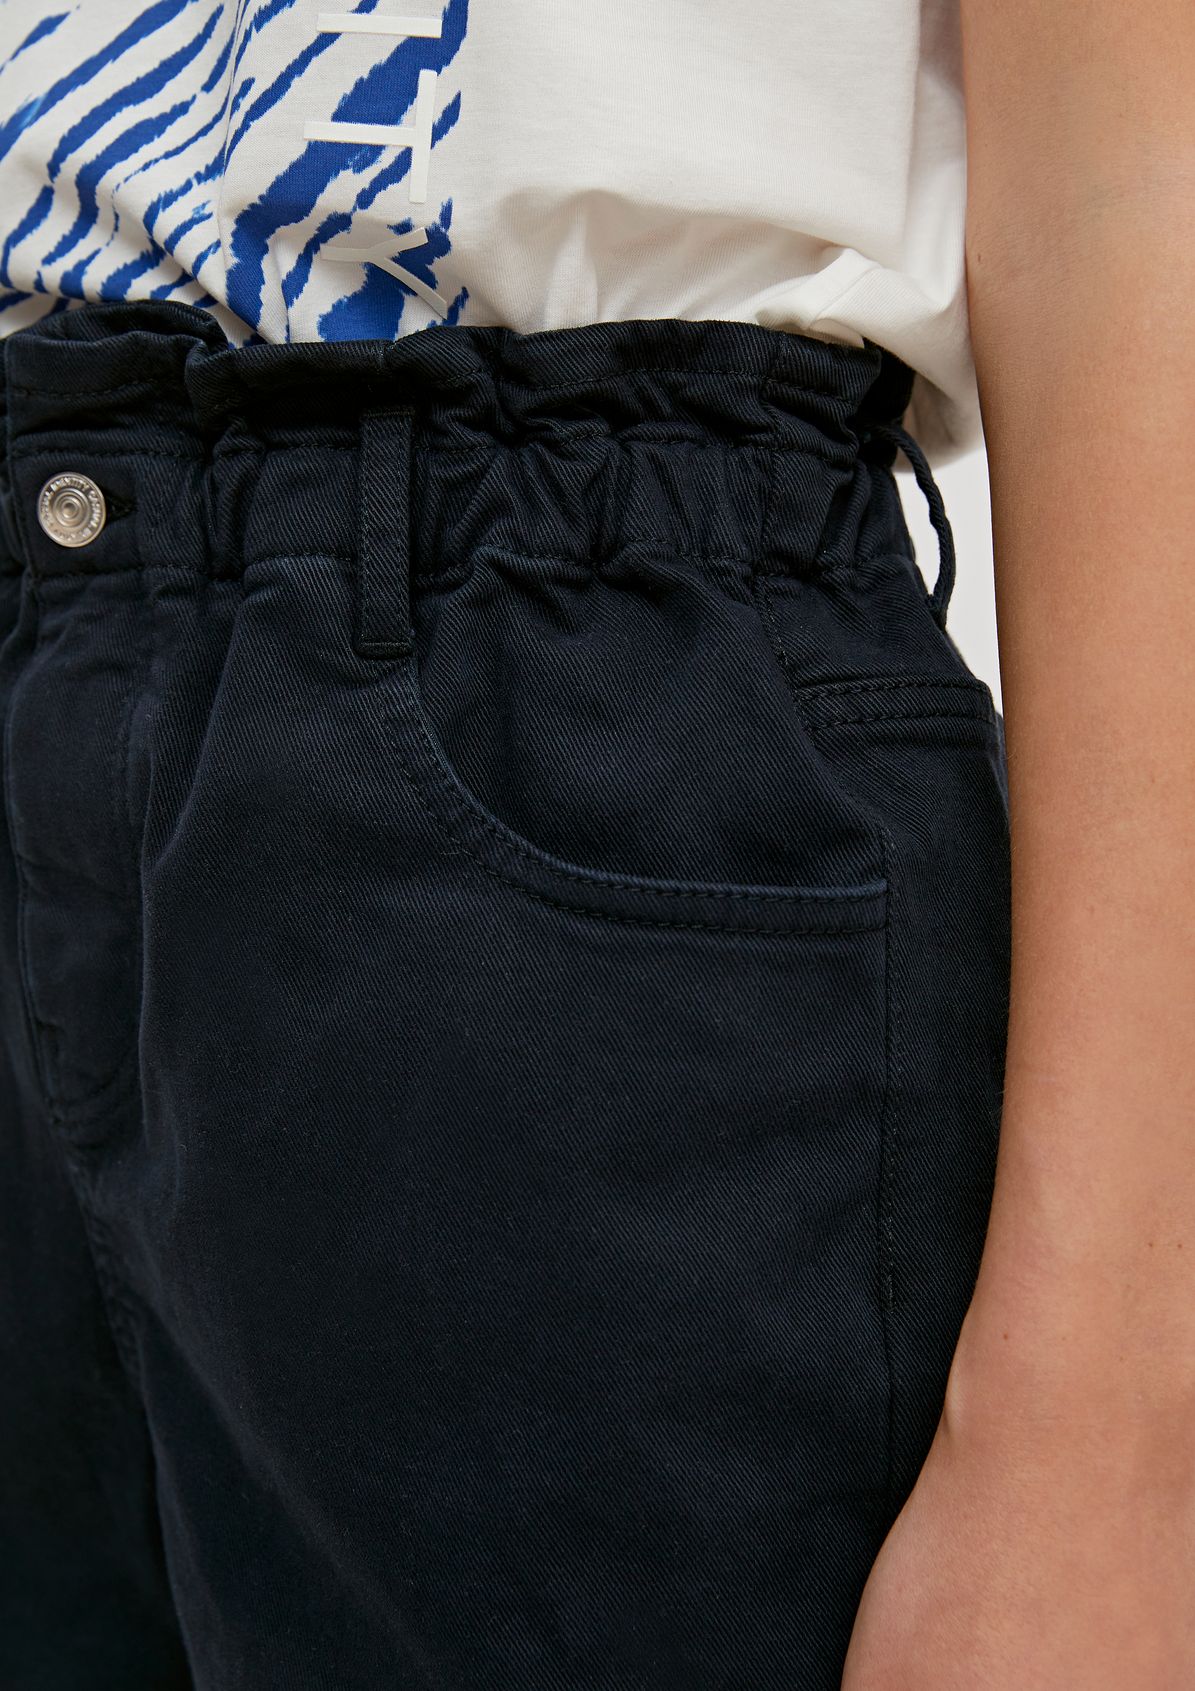 Regular fit: shorts with a paperbag waistband from comma